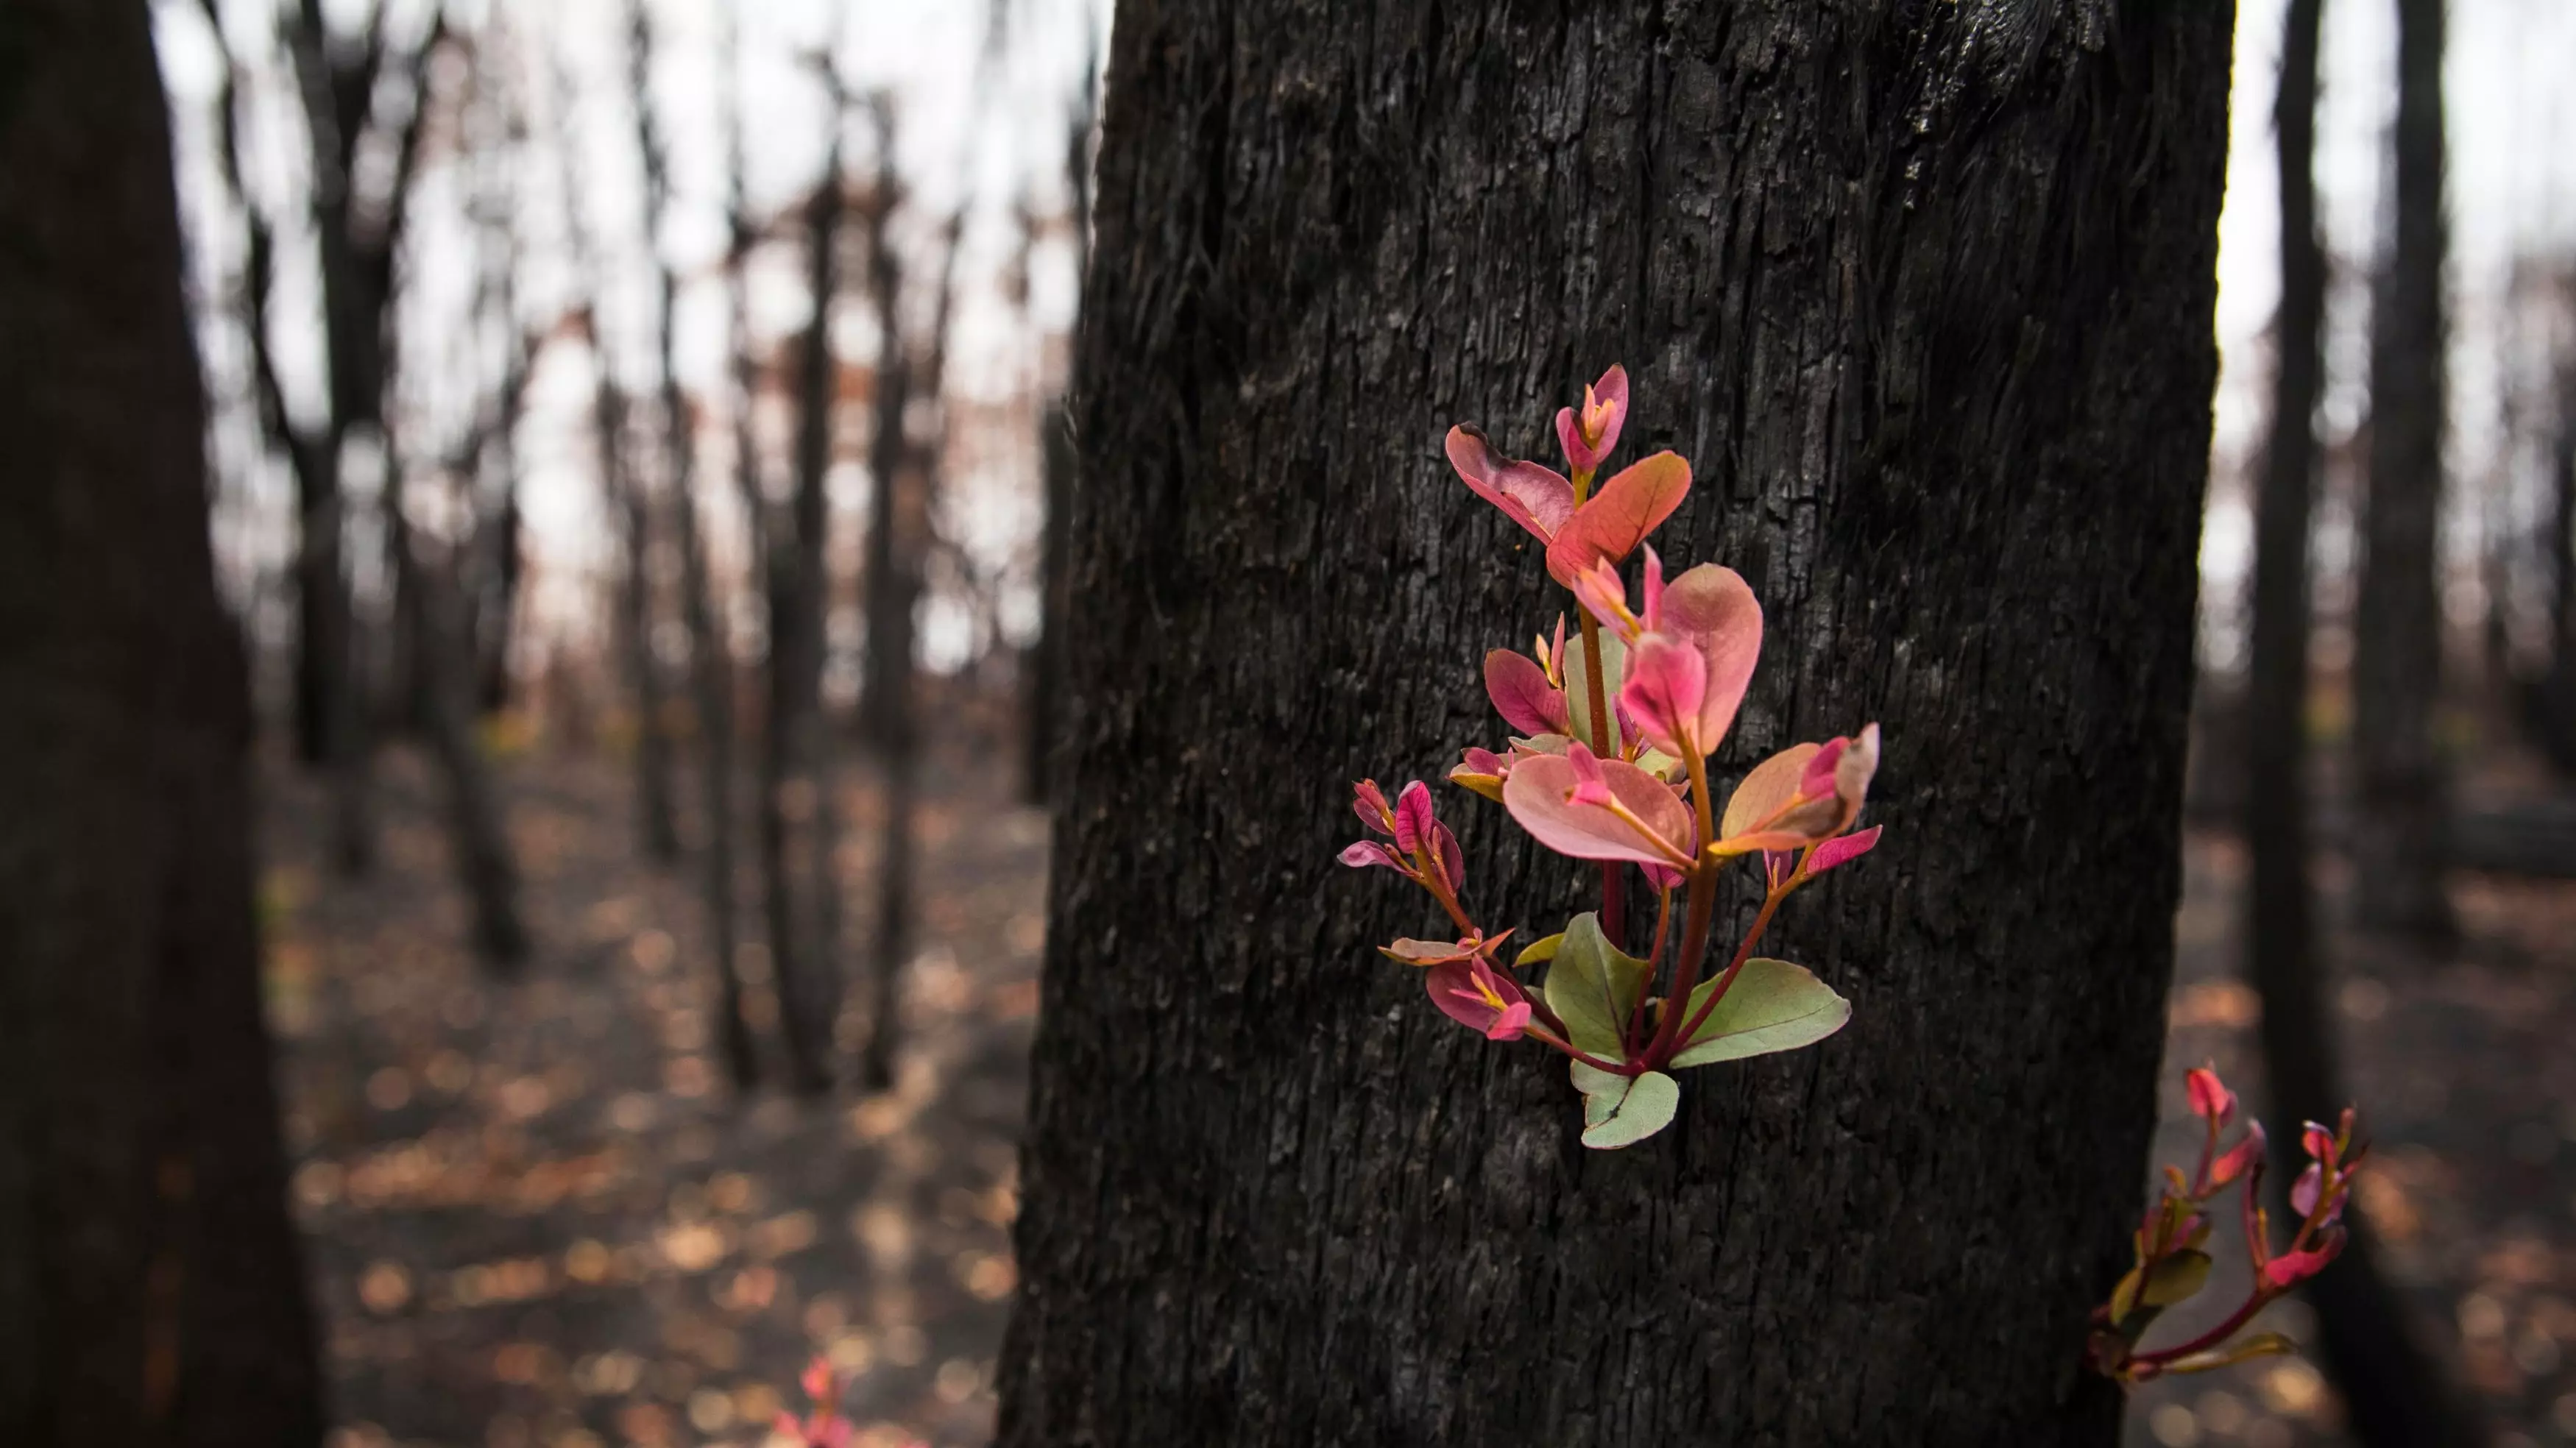 ​Australian Bush Sprouts New Life After Being Destroyed By Horrific Fires